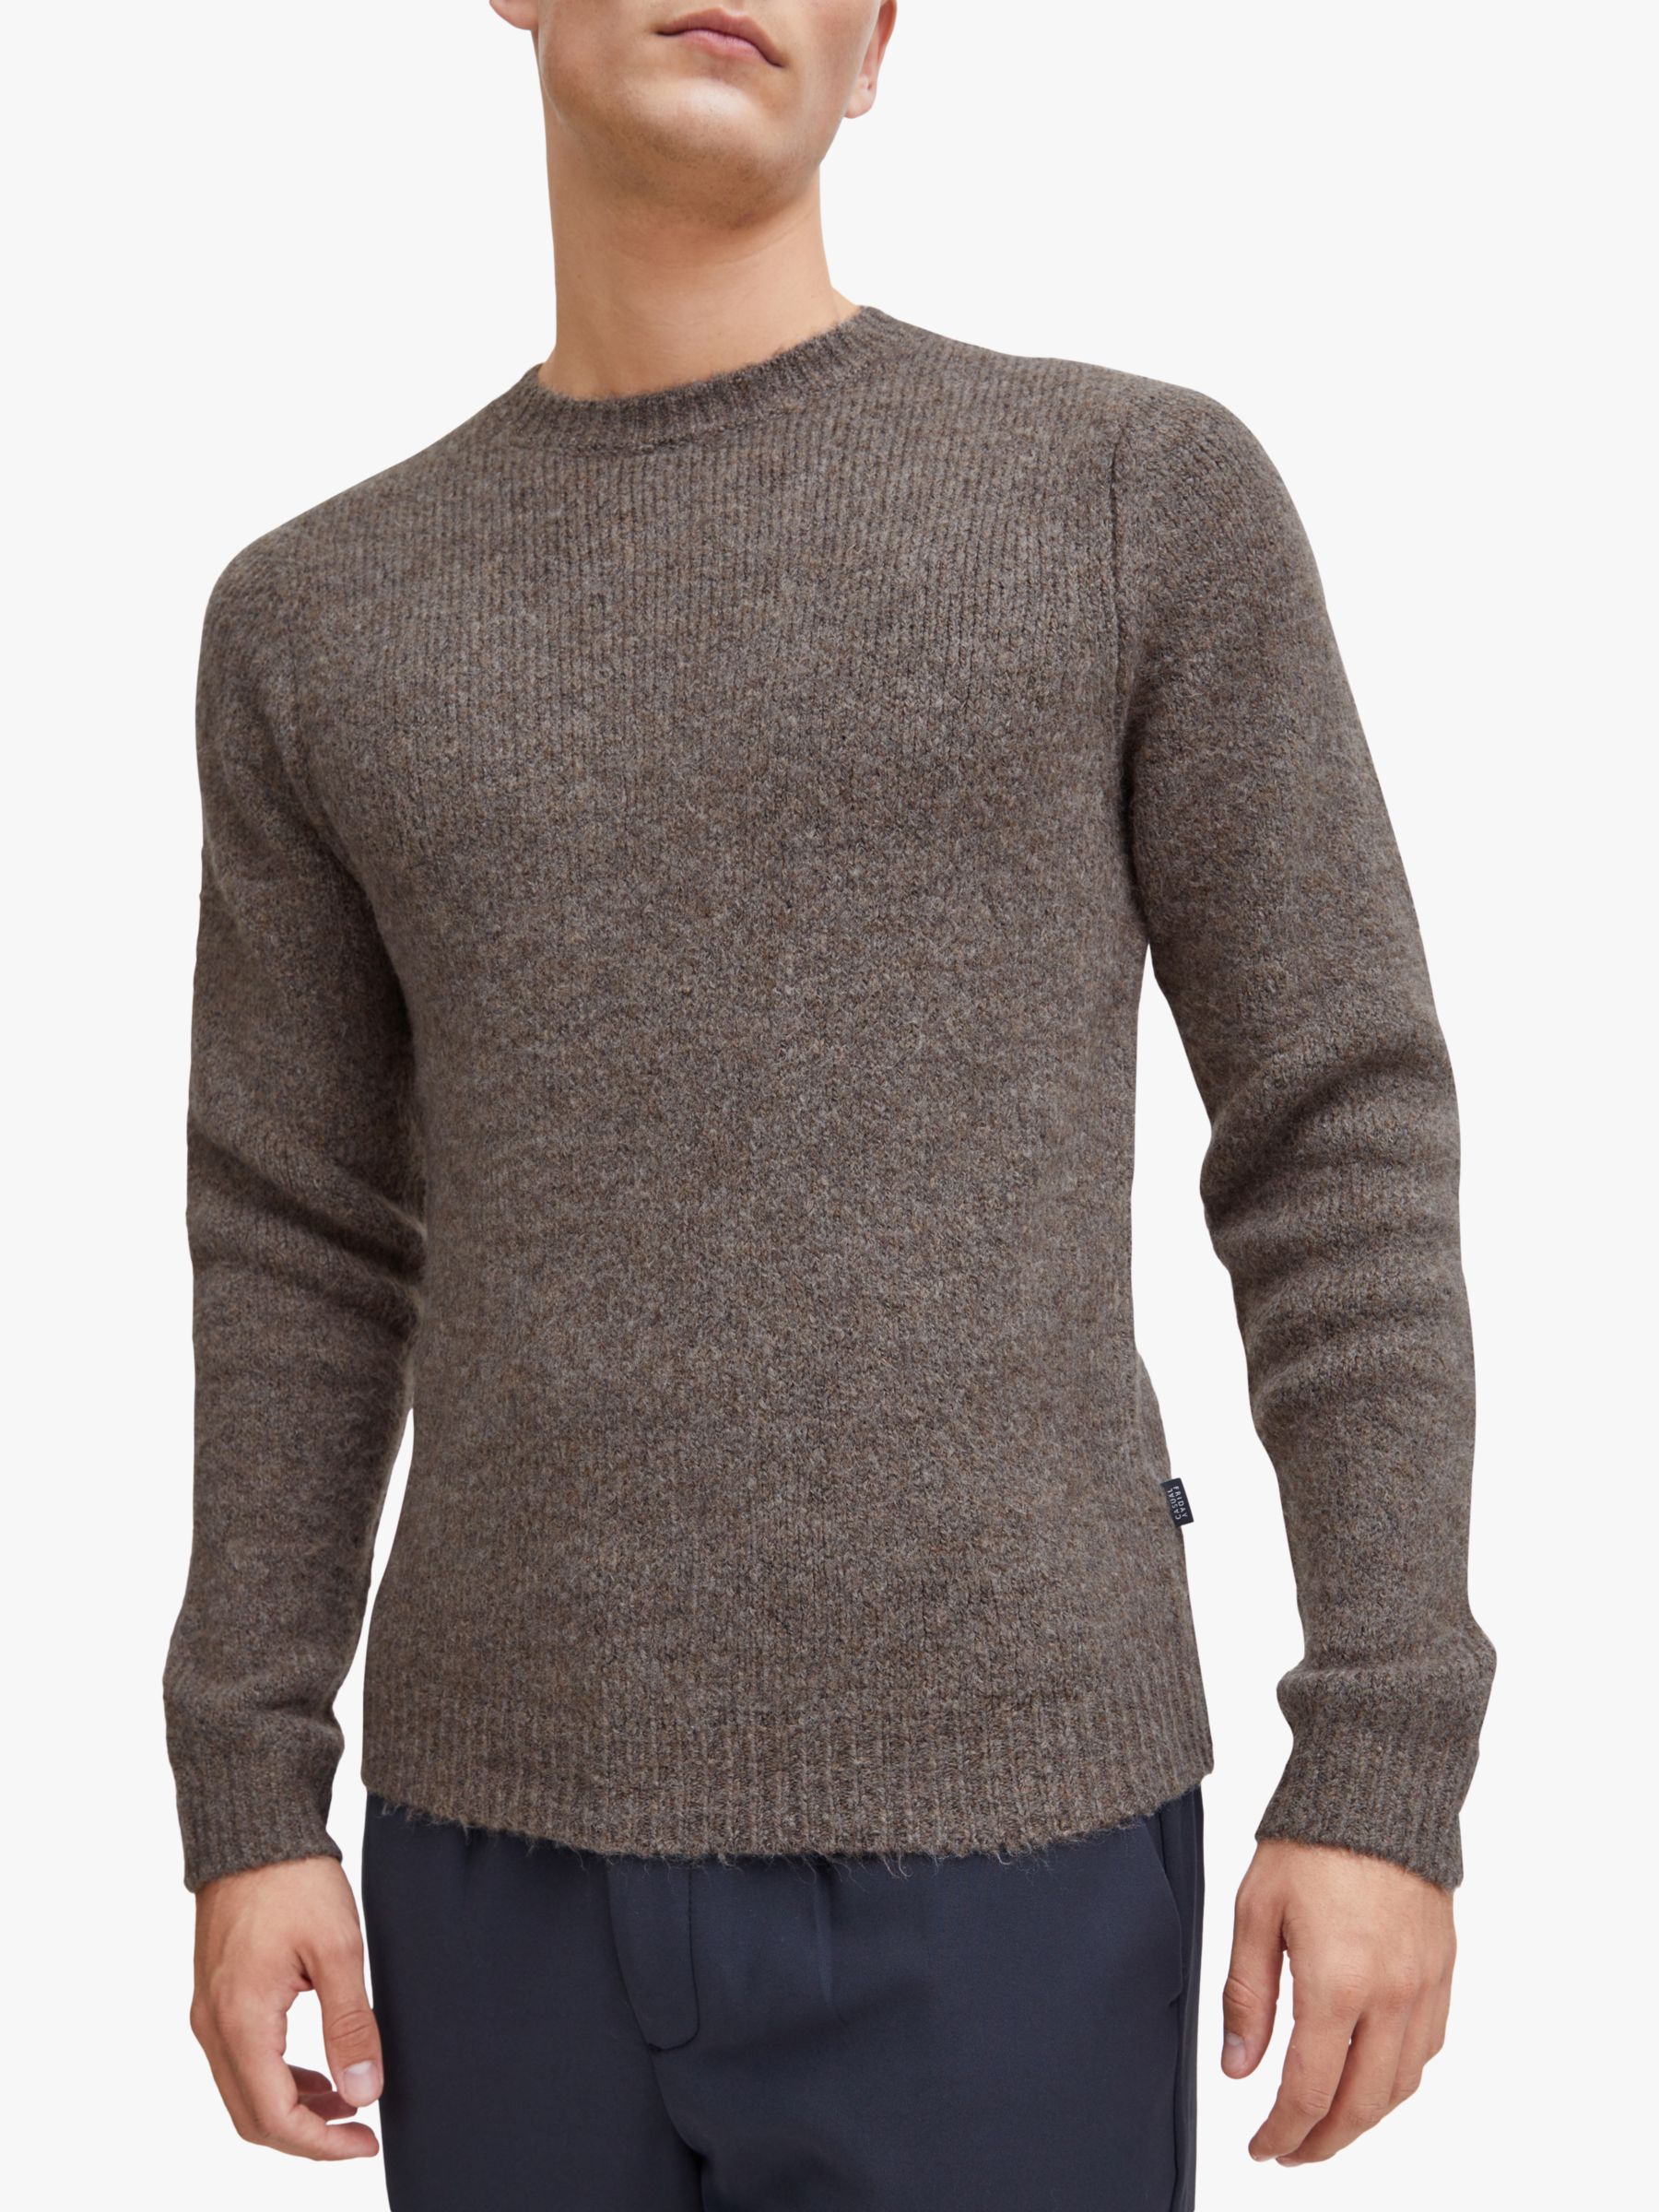 Casual Friday Karl Lambswool Mix Knitted Jumper, Brown, M